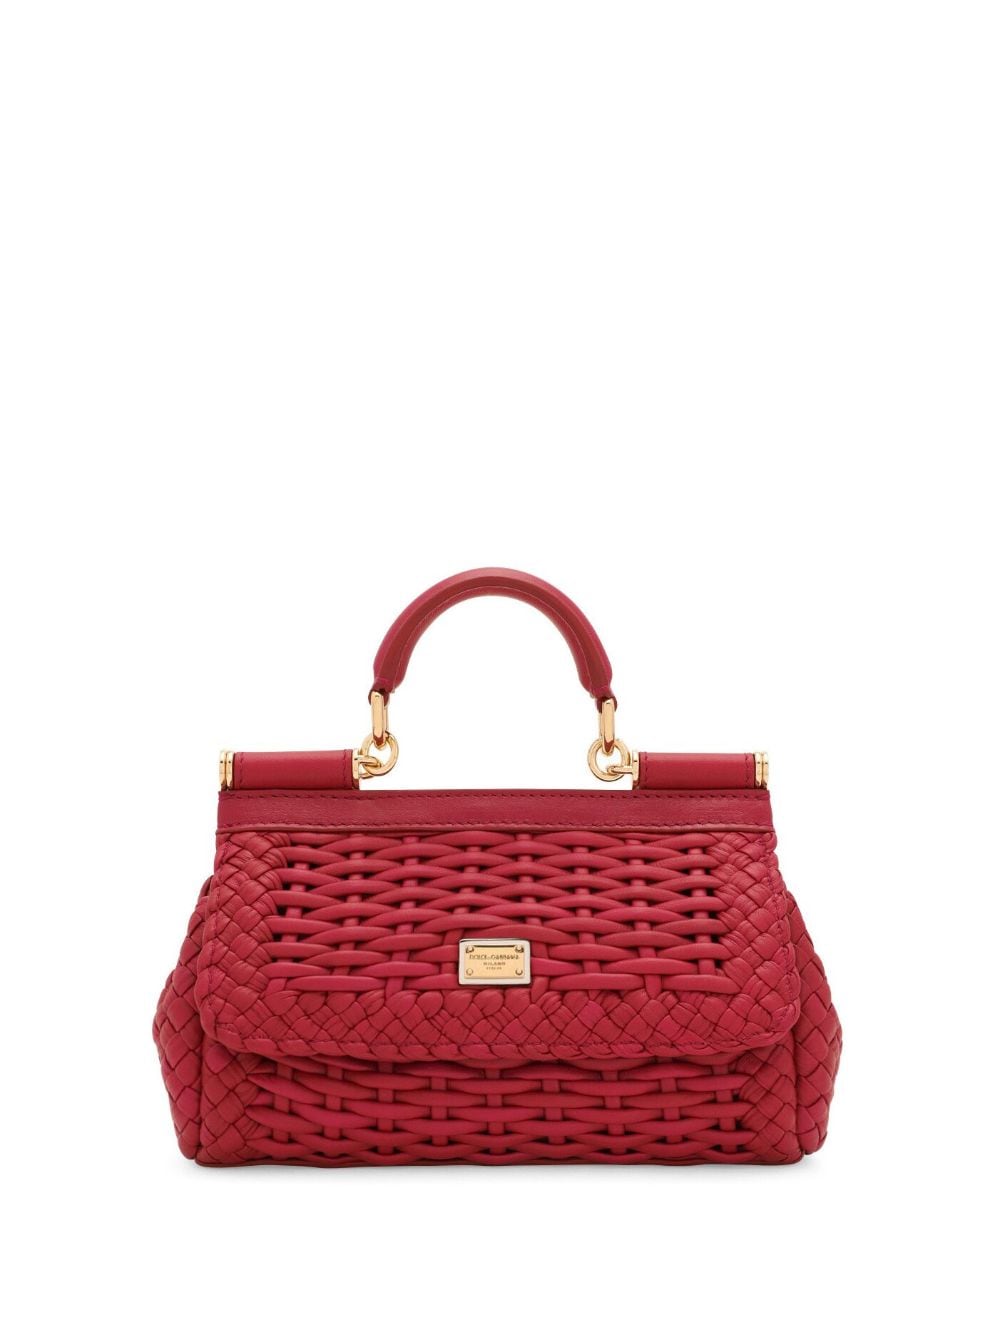 DOLCE & GABBANA Wine Red Mini Sicily Leather Shoulder Handbag with Gold-Tone Accents